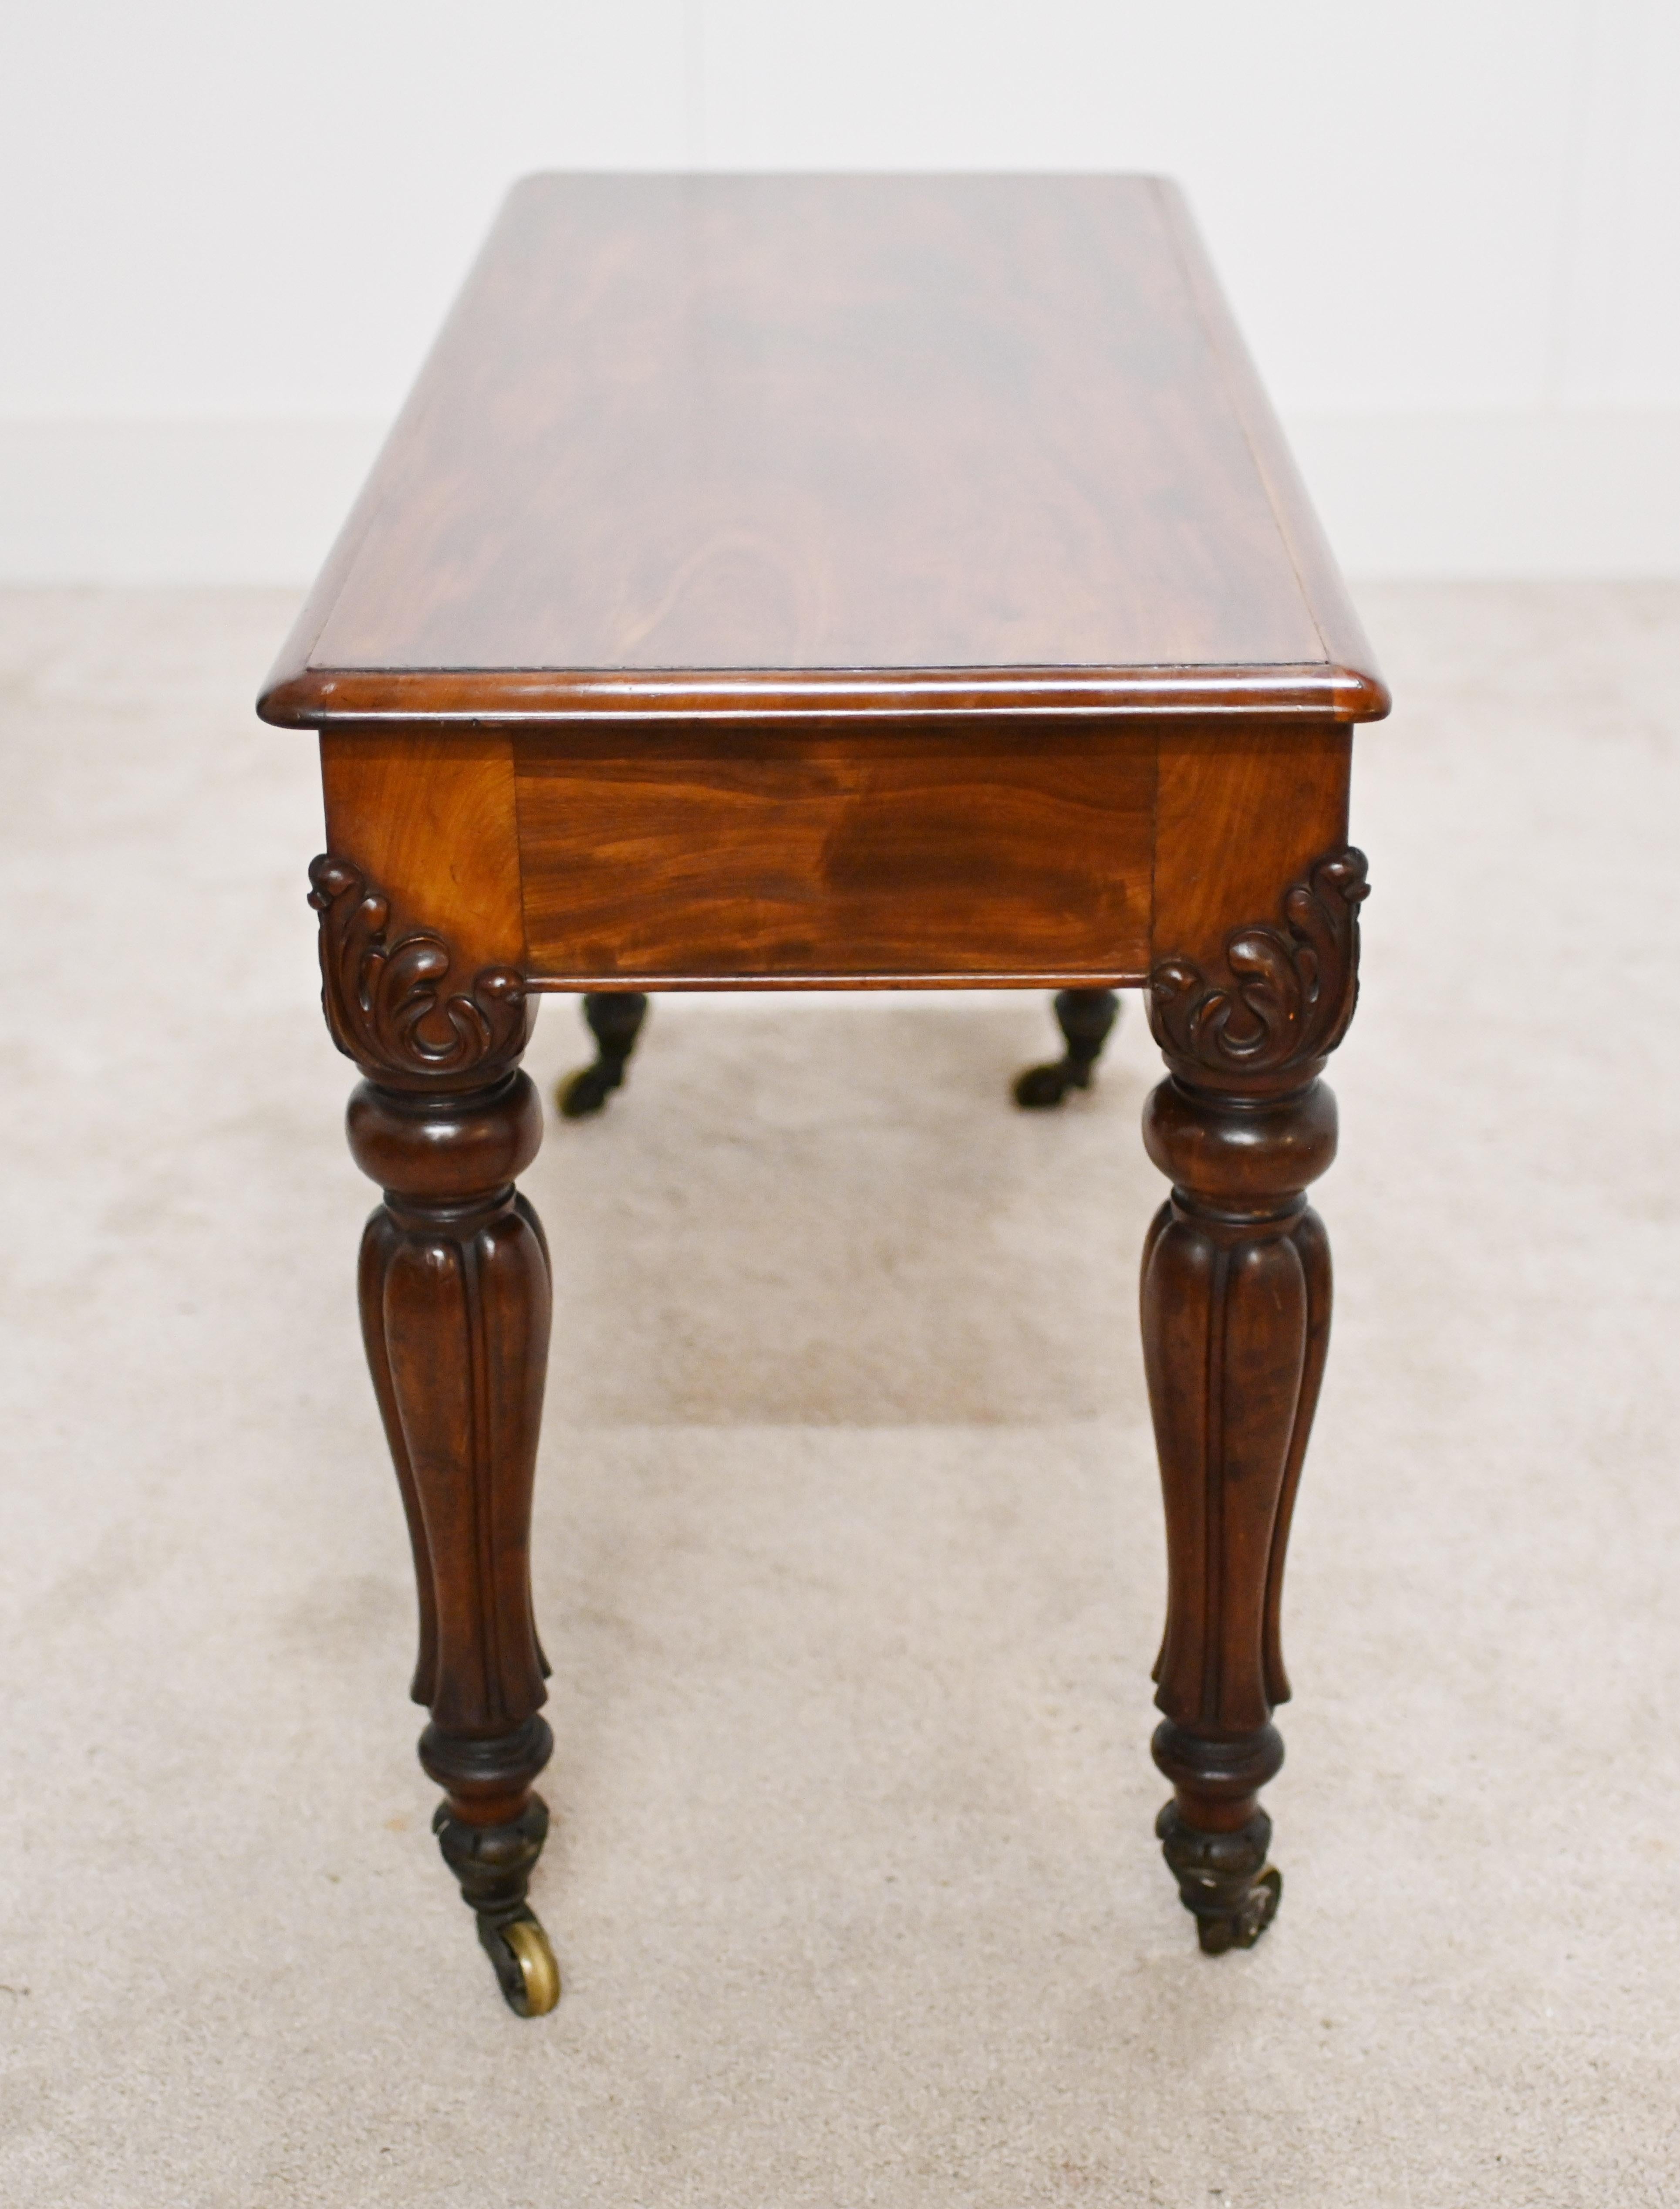 Victorian Mahogany Desk Hamptons and Sons London 1840 For Sale 7